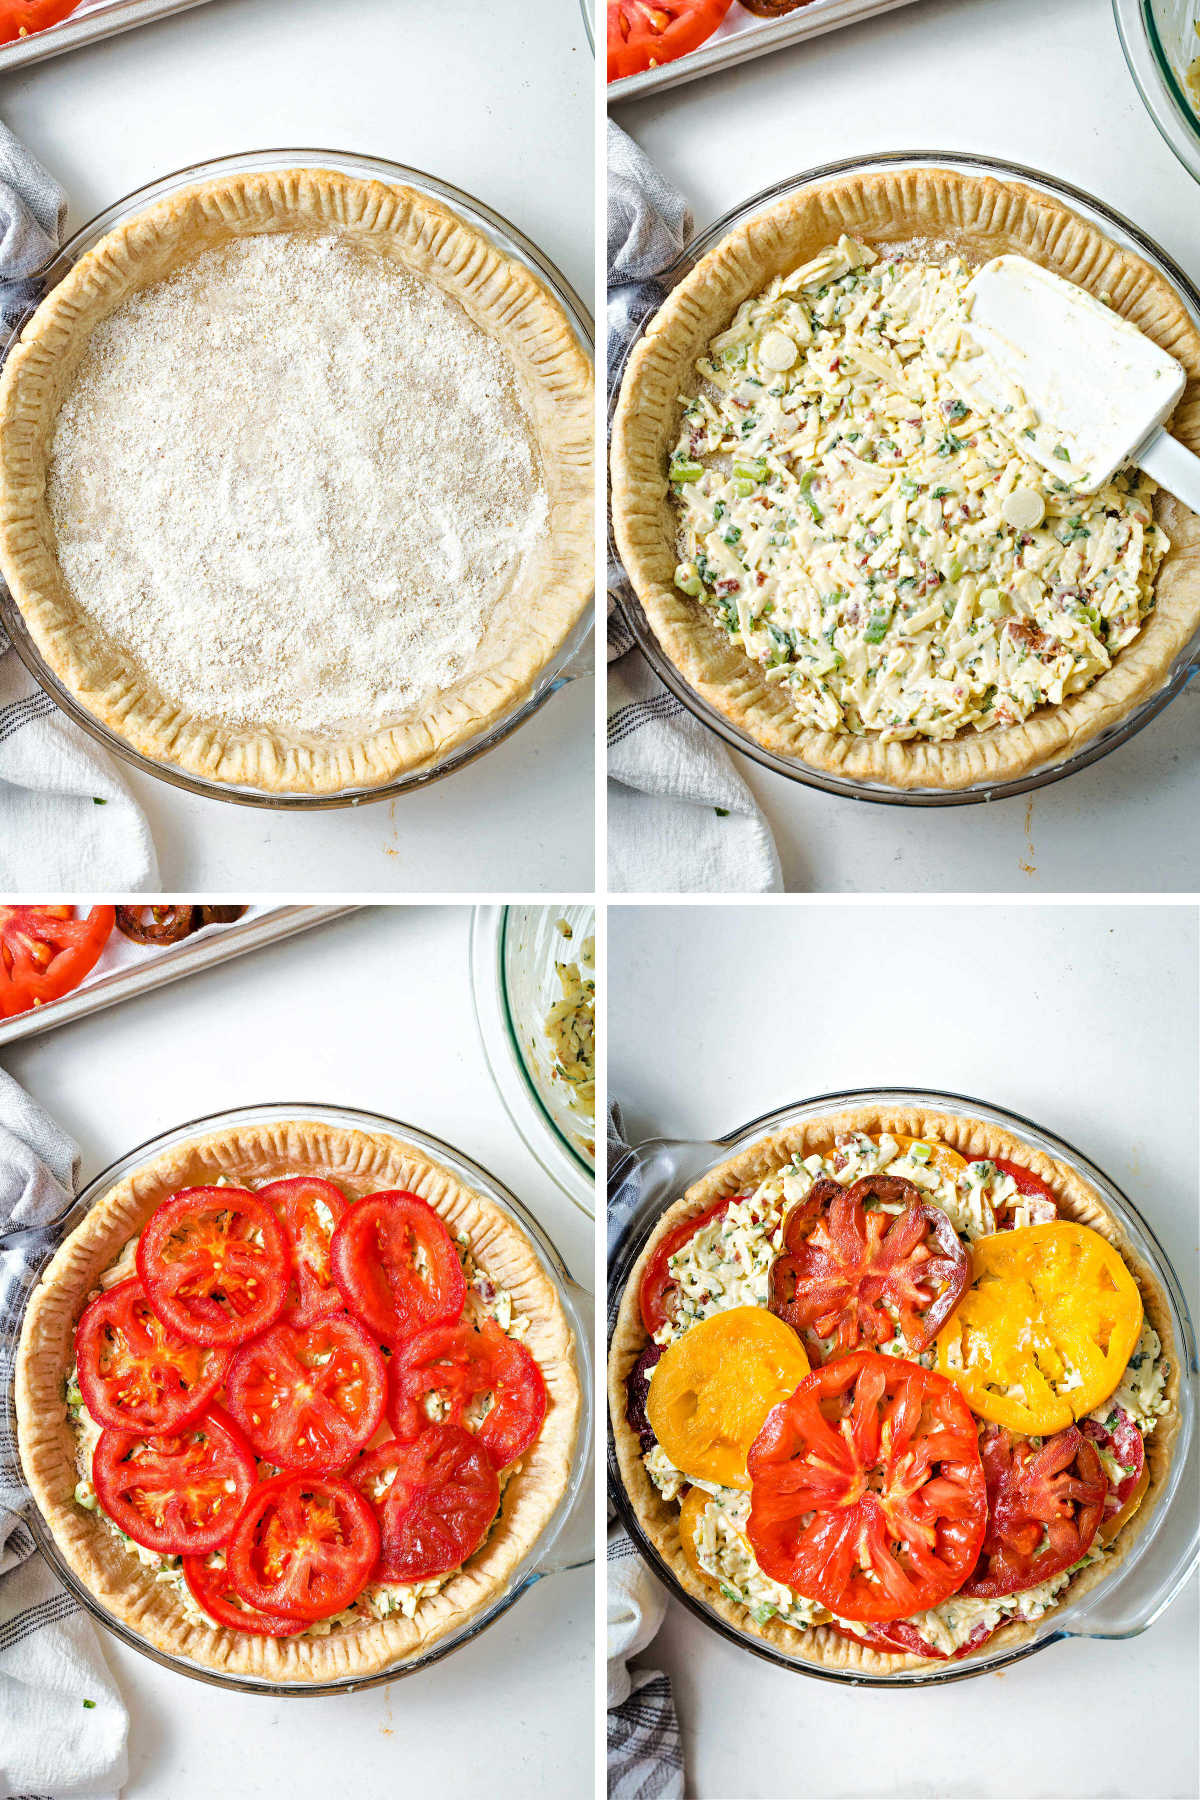 process steps for layering ingredients into a baked pie crust for tomato pie; dust the bottom with corn meal; spread cheese mixture alternately with tomato slices.